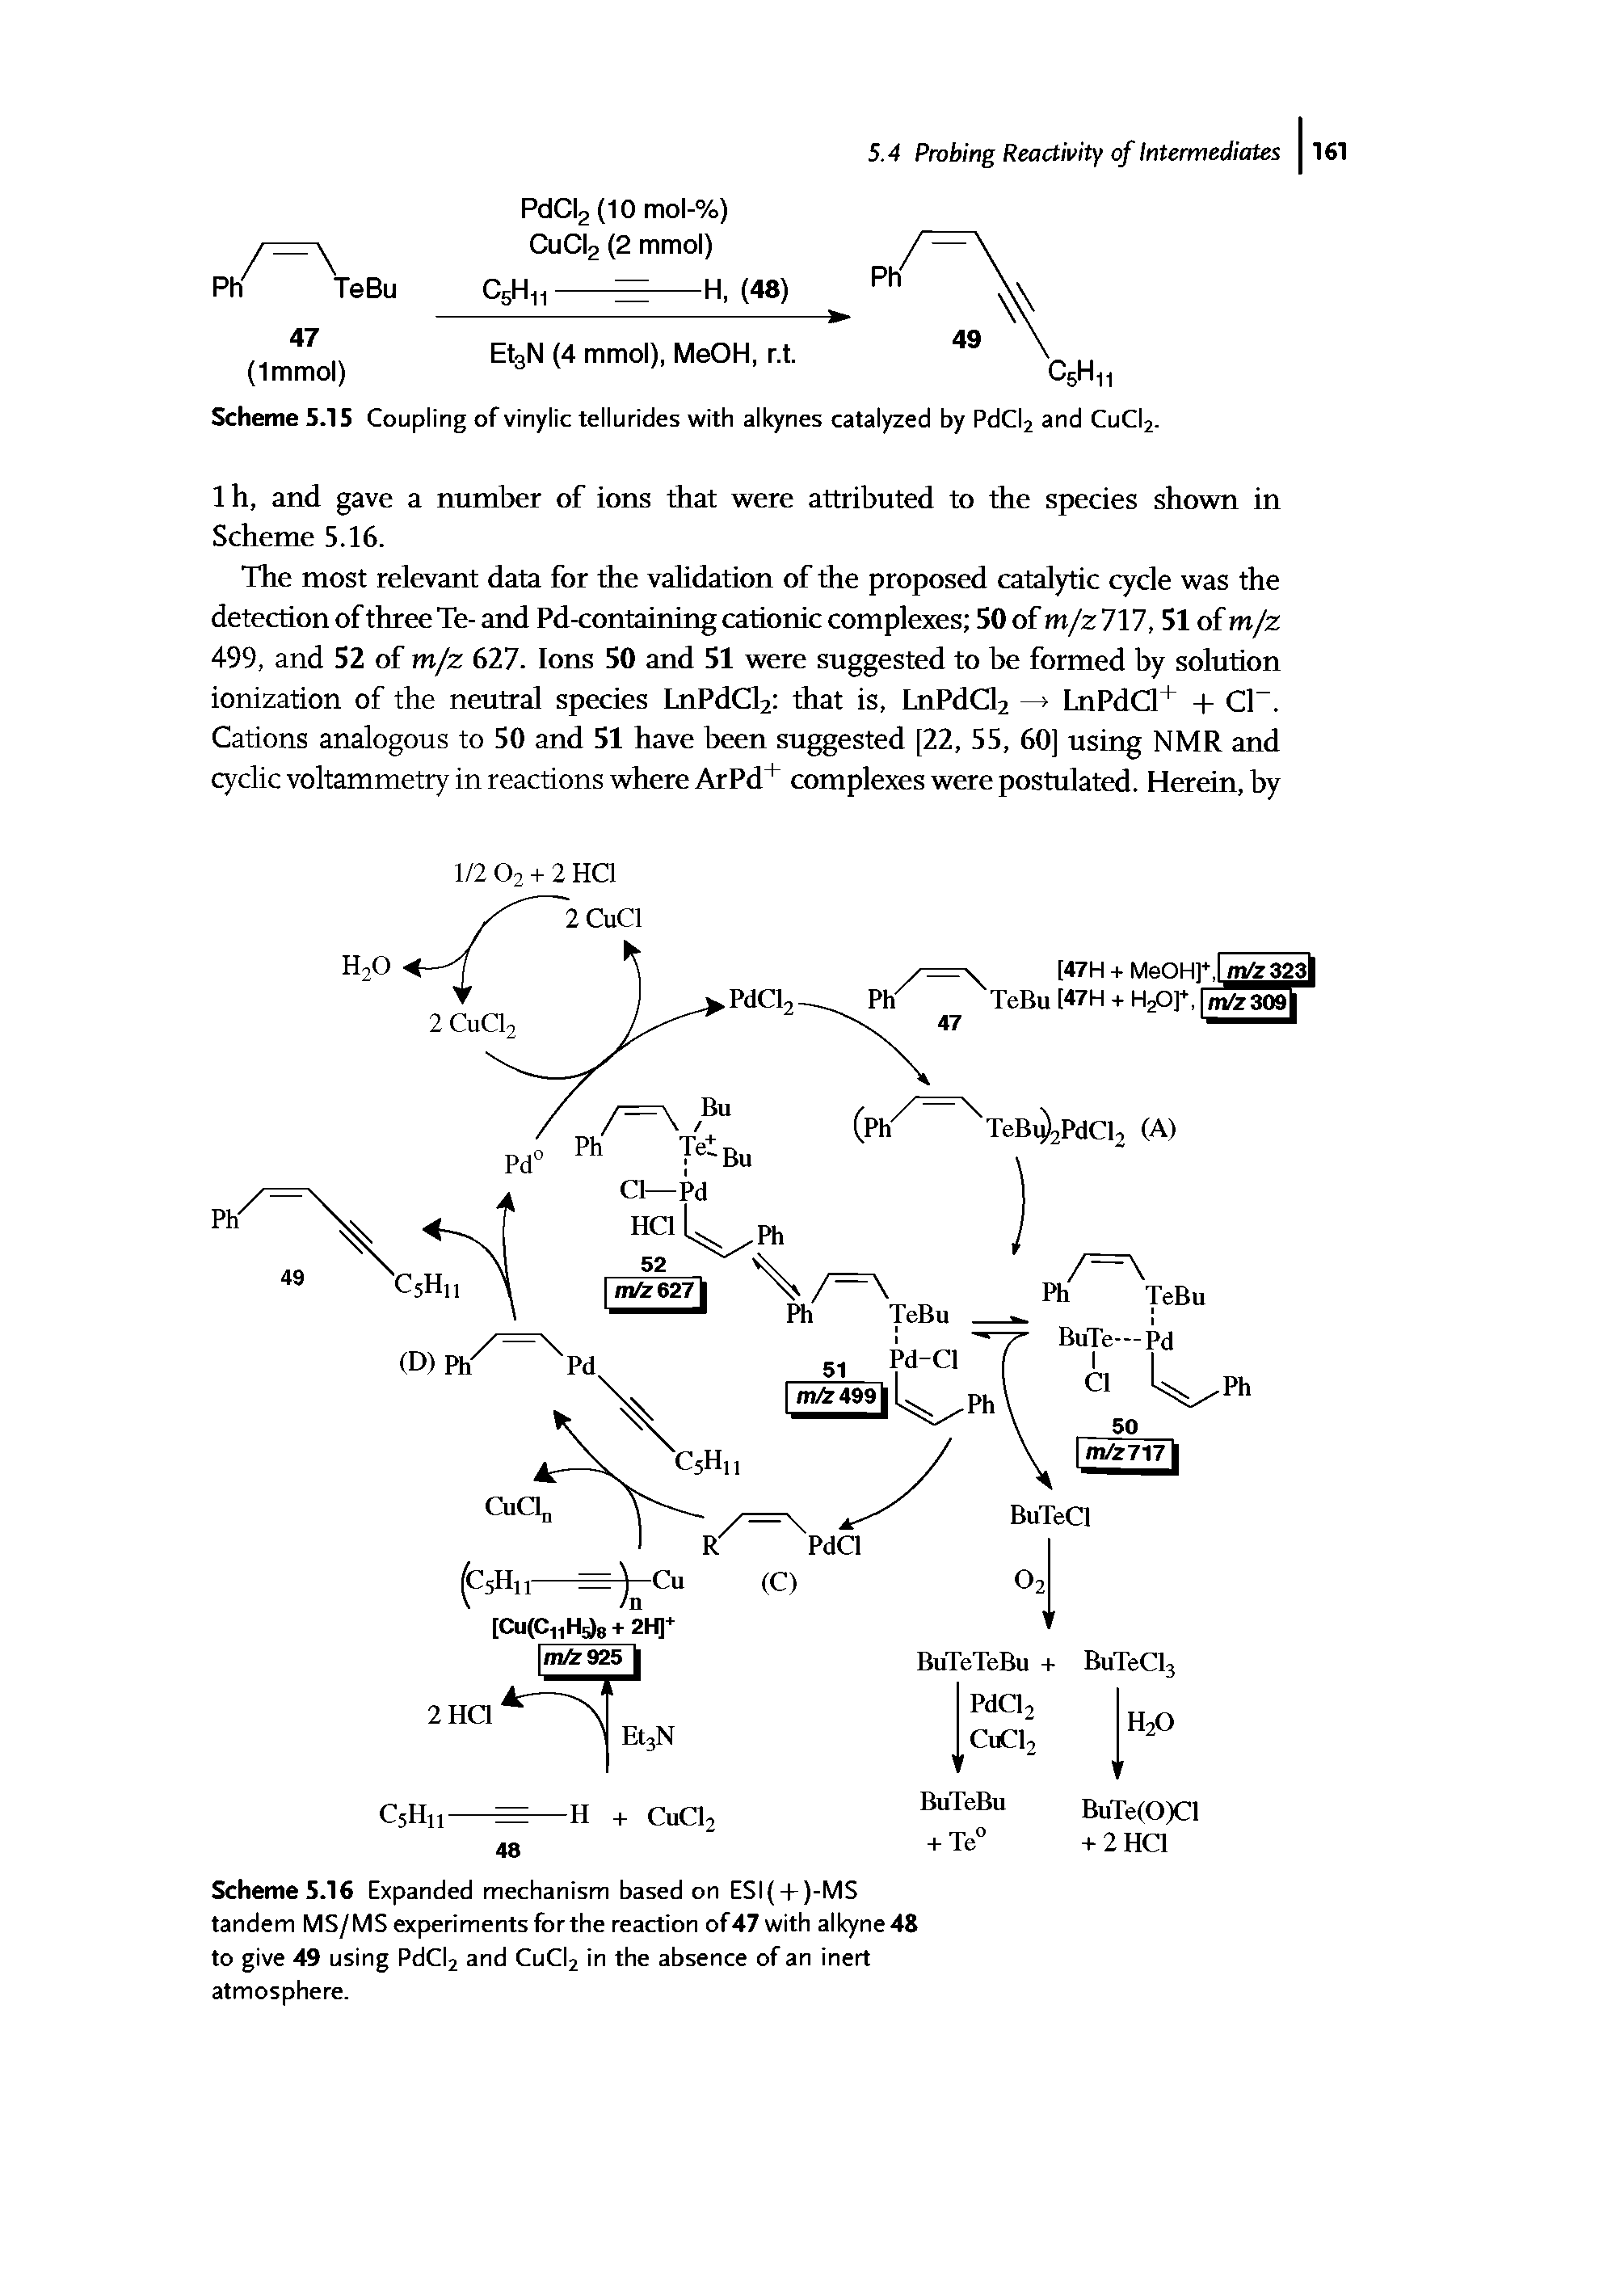 Scheme 5.16 Expanded mechanism based on ESI( + )-MS tandem MS/MS experiments for the reaction of 47 with alkyne48 to give 49 using PdCl2 and CUCI2 in the absence of an inert atmosphere.